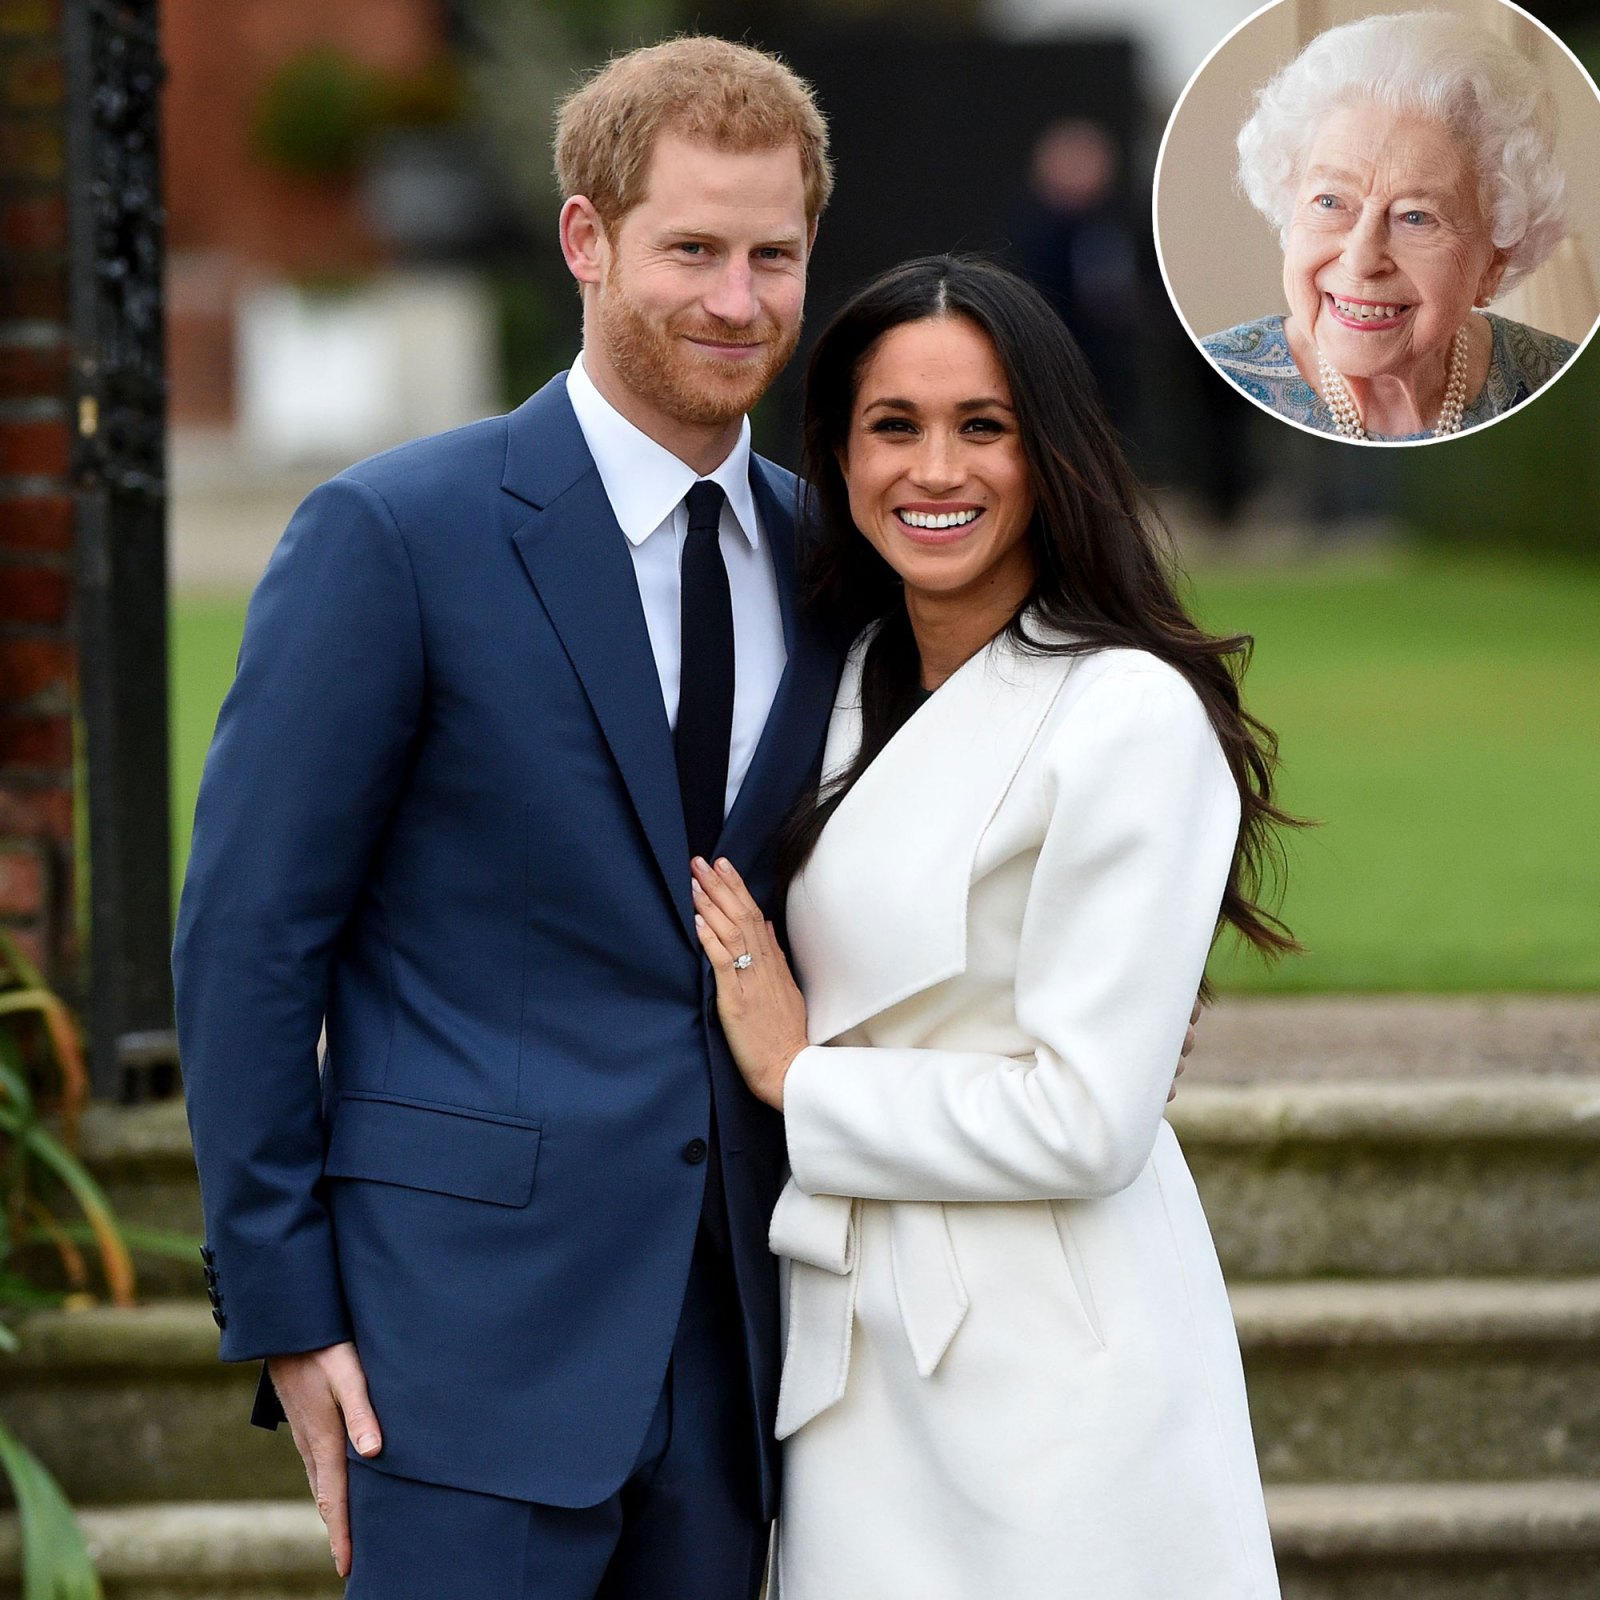 Why Meghan Markle and Prince Harry Didn't Join Royal Family on Balcony at Queen Elizabeth II's Jubilee